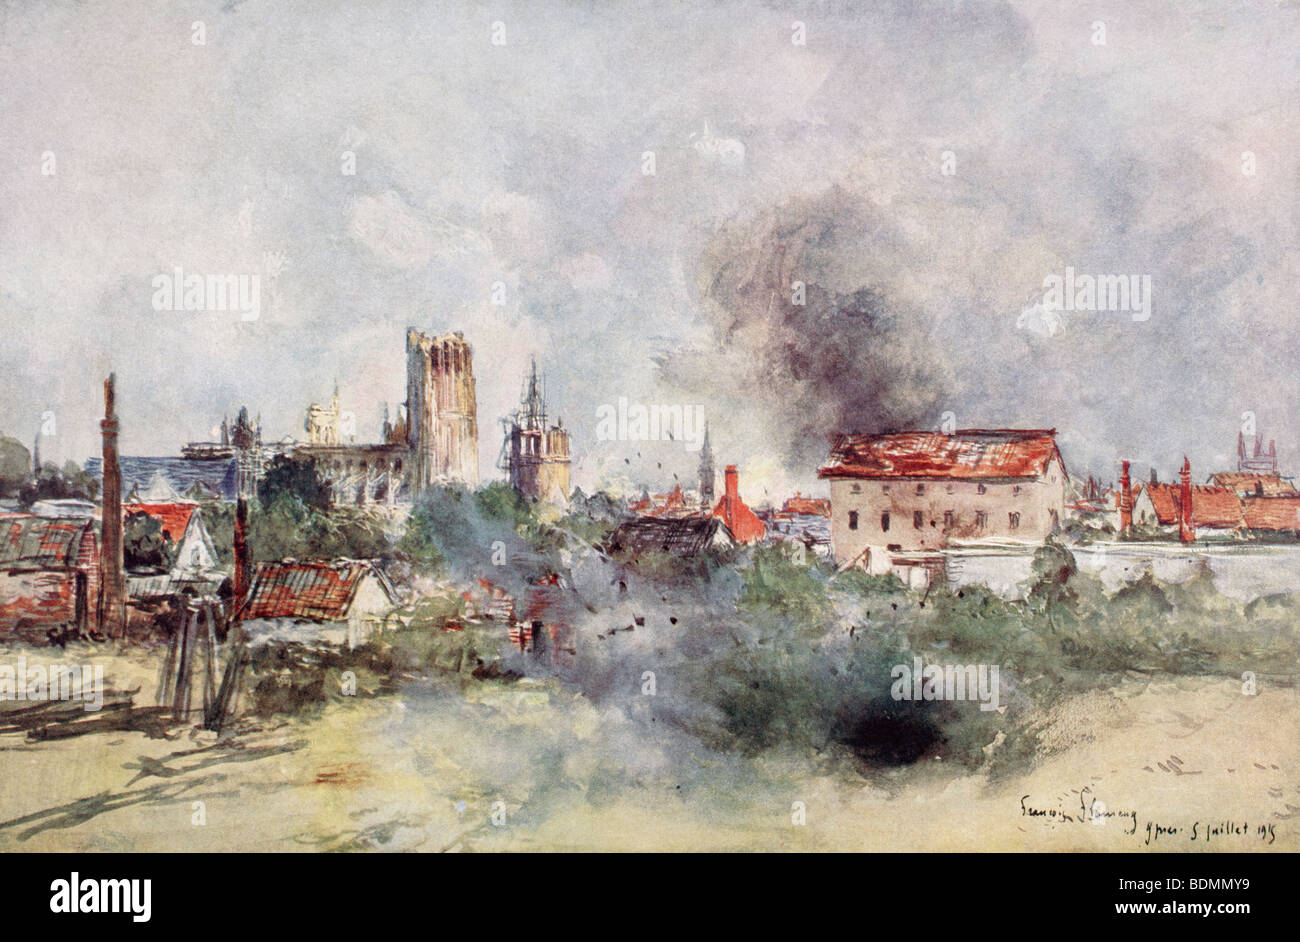 Ypres under bombardment July 5, 1915. Stock Photo